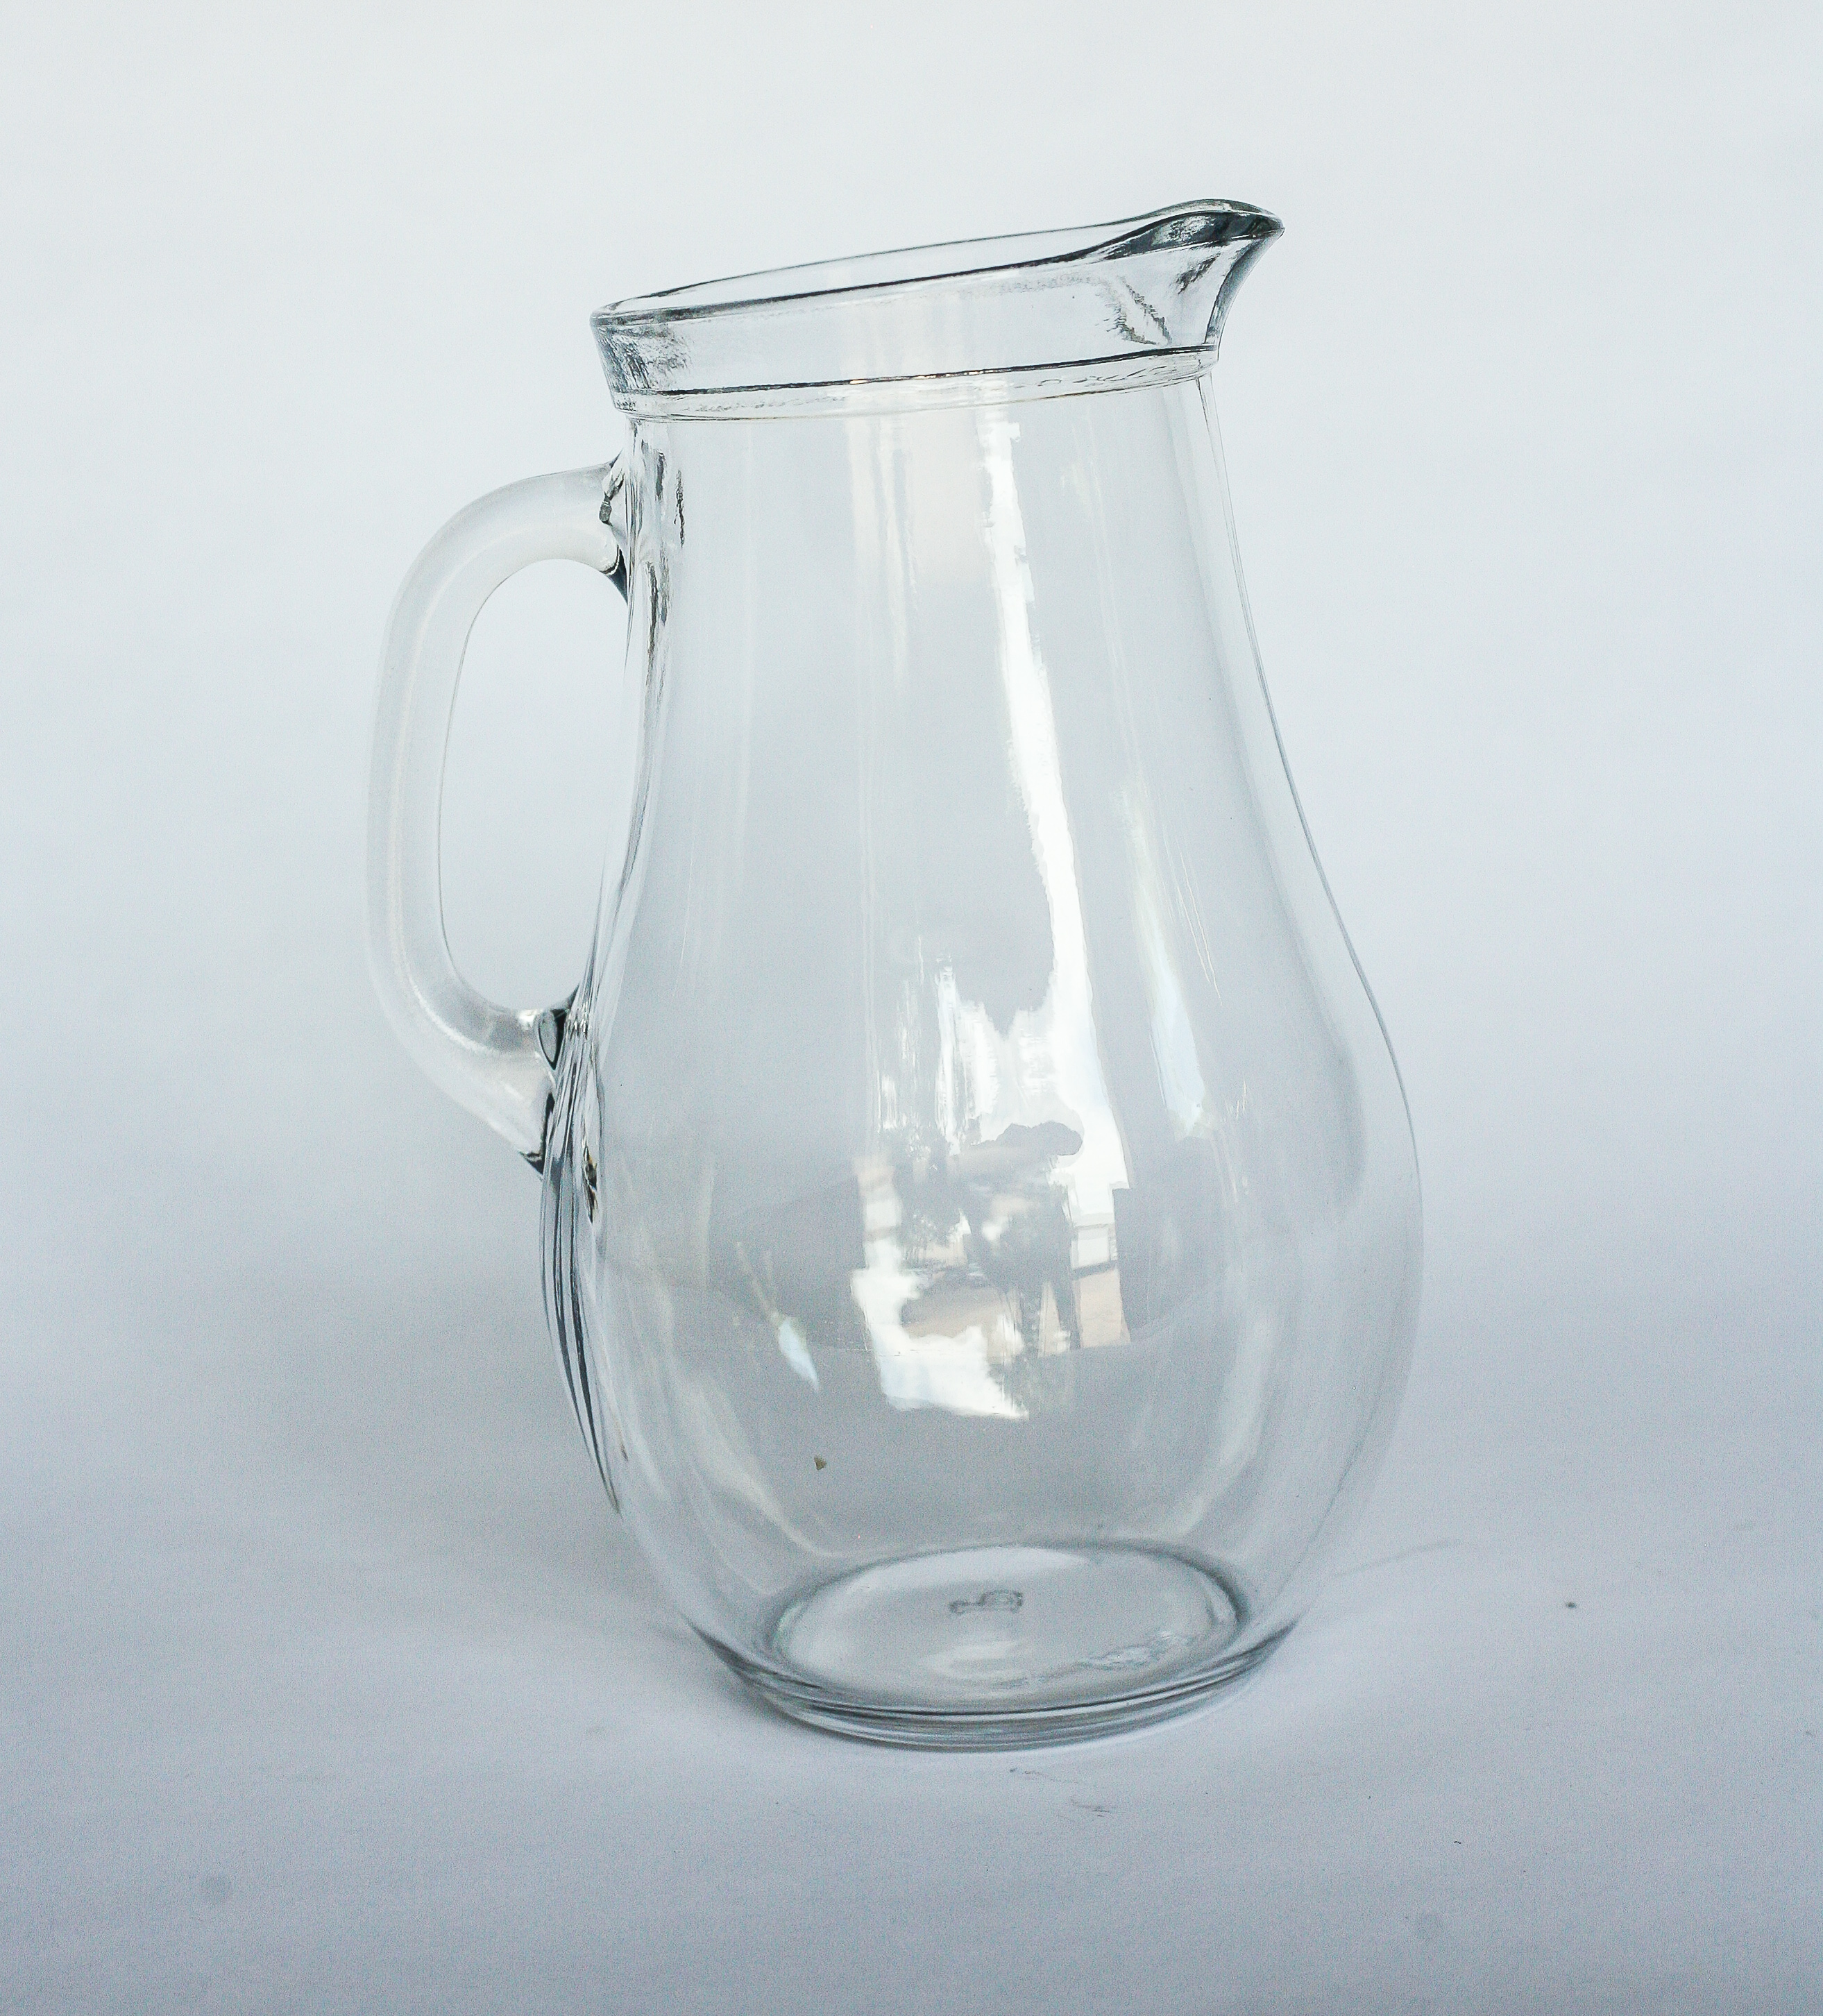 Glass, 60 oz. PITCHER - A Finer Event - Event Rentals in Houston, Texas